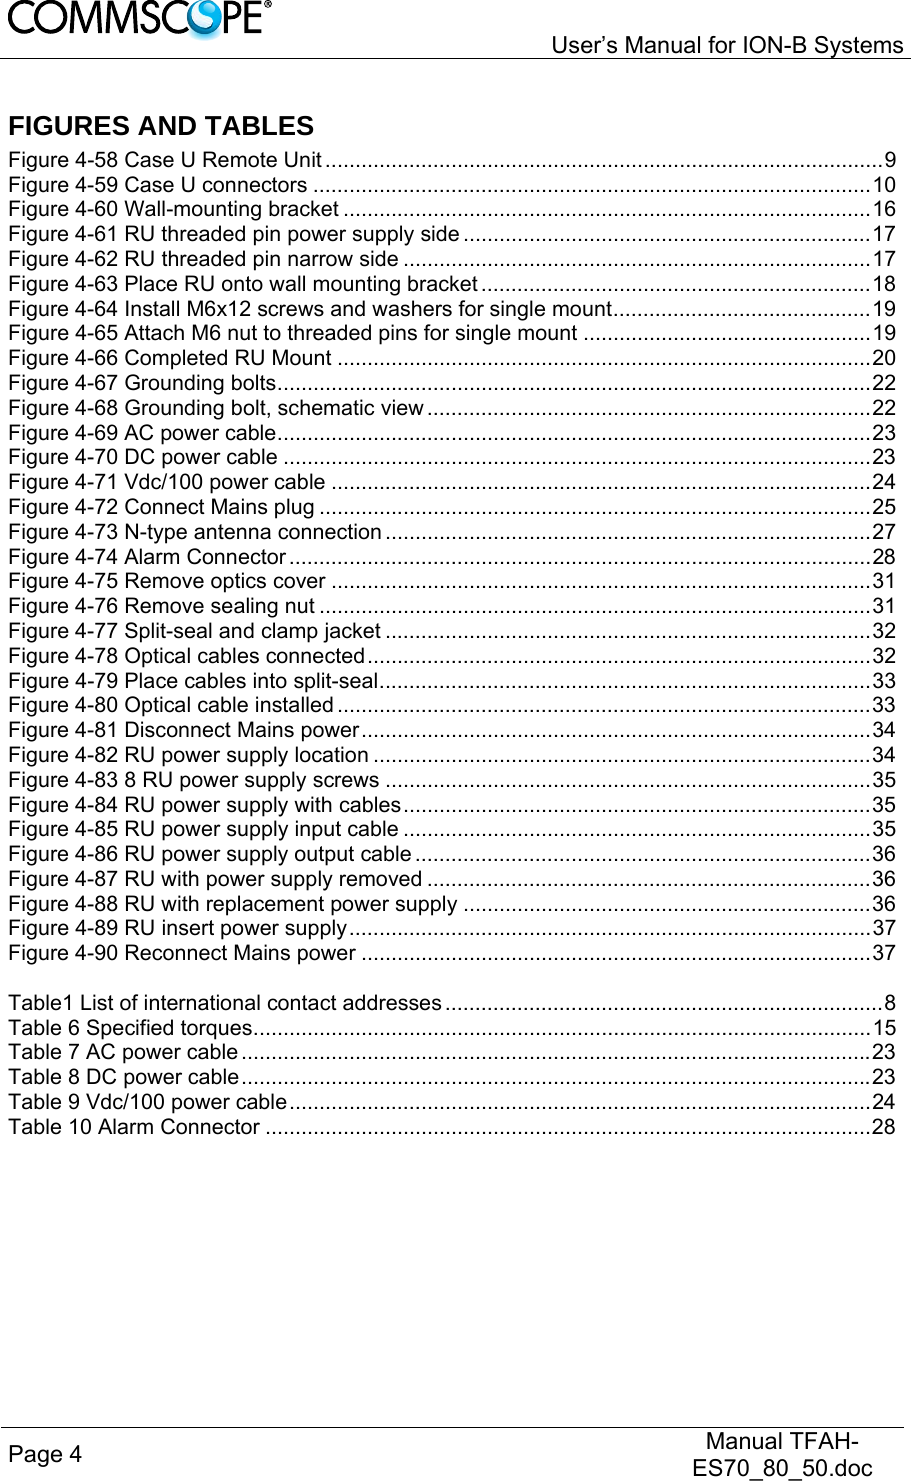   User’s Manual for ION-B Systems Page 4   Manual TFAH-ES70_80_50.doc  FIGURES AND TABLES Figure 4-58 Case U Remote Unit ............................................................................................. 9Figure 4-59 Case U connectors ............................................................................................. 10Figure 4-60 Wall-mounting bracket ........................................................................................ 16Figure 4-61 RU threaded pin power supply side .................................................................... 17Figure 4-62 RU threaded pin narrow side .............................................................................. 17Figure 4-63 Place RU onto wall mounting bracket ................................................................. 18Figure 4-64 Install M6x12 screws and washers for single mount ........................................... 19Figure 4-65 Attach M6 nut to threaded pins for single mount ................................................ 19Figure 4-66 Completed RU Mount ......................................................................................... 20Figure 4-67 Grounding bolts ................................................................................................... 22Figure 4-68 Grounding bolt, schematic view .......................................................................... 22Figure 4-69 AC power cable ................................................................................................... 23Figure 4-70 DC power cable .................................................................................................. 23Figure 4-71 Vdc/100 power cable .......................................................................................... 24Figure 4-72 Connect Mains plug ............................................................................................ 25Figure 4-73 N-type antenna connection ................................................................................. 27Figure 4-74 Alarm Connector ................................................................................................. 28Figure 4-75 Remove optics cover .......................................................................................... 31Figure 4-76 Remove sealing nut ............................................................................................ 31Figure 4-77 Split-seal and clamp jacket ................................................................................. 32Figure 4-78 Optical cables connected .................................................................................... 32Figure 4-79 Place cables into split-seal .................................................................................. 33Figure 4-80 Optical cable installed ......................................................................................... 33Figure 4-81 Disconnect Mains power ..................................................................................... 34Figure 4-82 RU power supply location ................................................................................... 34Figure 4-83 8 RU power supply screws ................................................................................. 35Figure 4-84 RU power supply with cables .............................................................................. 35Figure 4-85 RU power supply input cable .............................................................................. 35Figure 4-86 RU power supply output cable ............................................................................ 36Figure 4-87 RU with power supply removed .......................................................................... 36Figure 4-88 RU with replacement power supply .................................................................... 36Figure 4-89 RU insert power supply ....................................................................................... 37Figure 4-90 Reconnect Mains power ..................................................................................... 37 Table1 List of international contact addresses ......................................................................... 8Table 6 Specified torques ....................................................................................................... 15Table 7 AC power cable ......................................................................................................... 23Table 8 DC power cable ......................................................................................................... 23Table 9 Vdc/100 power cable ................................................................................................. 24Table 10 Alarm Connector ..................................................................................................... 28 